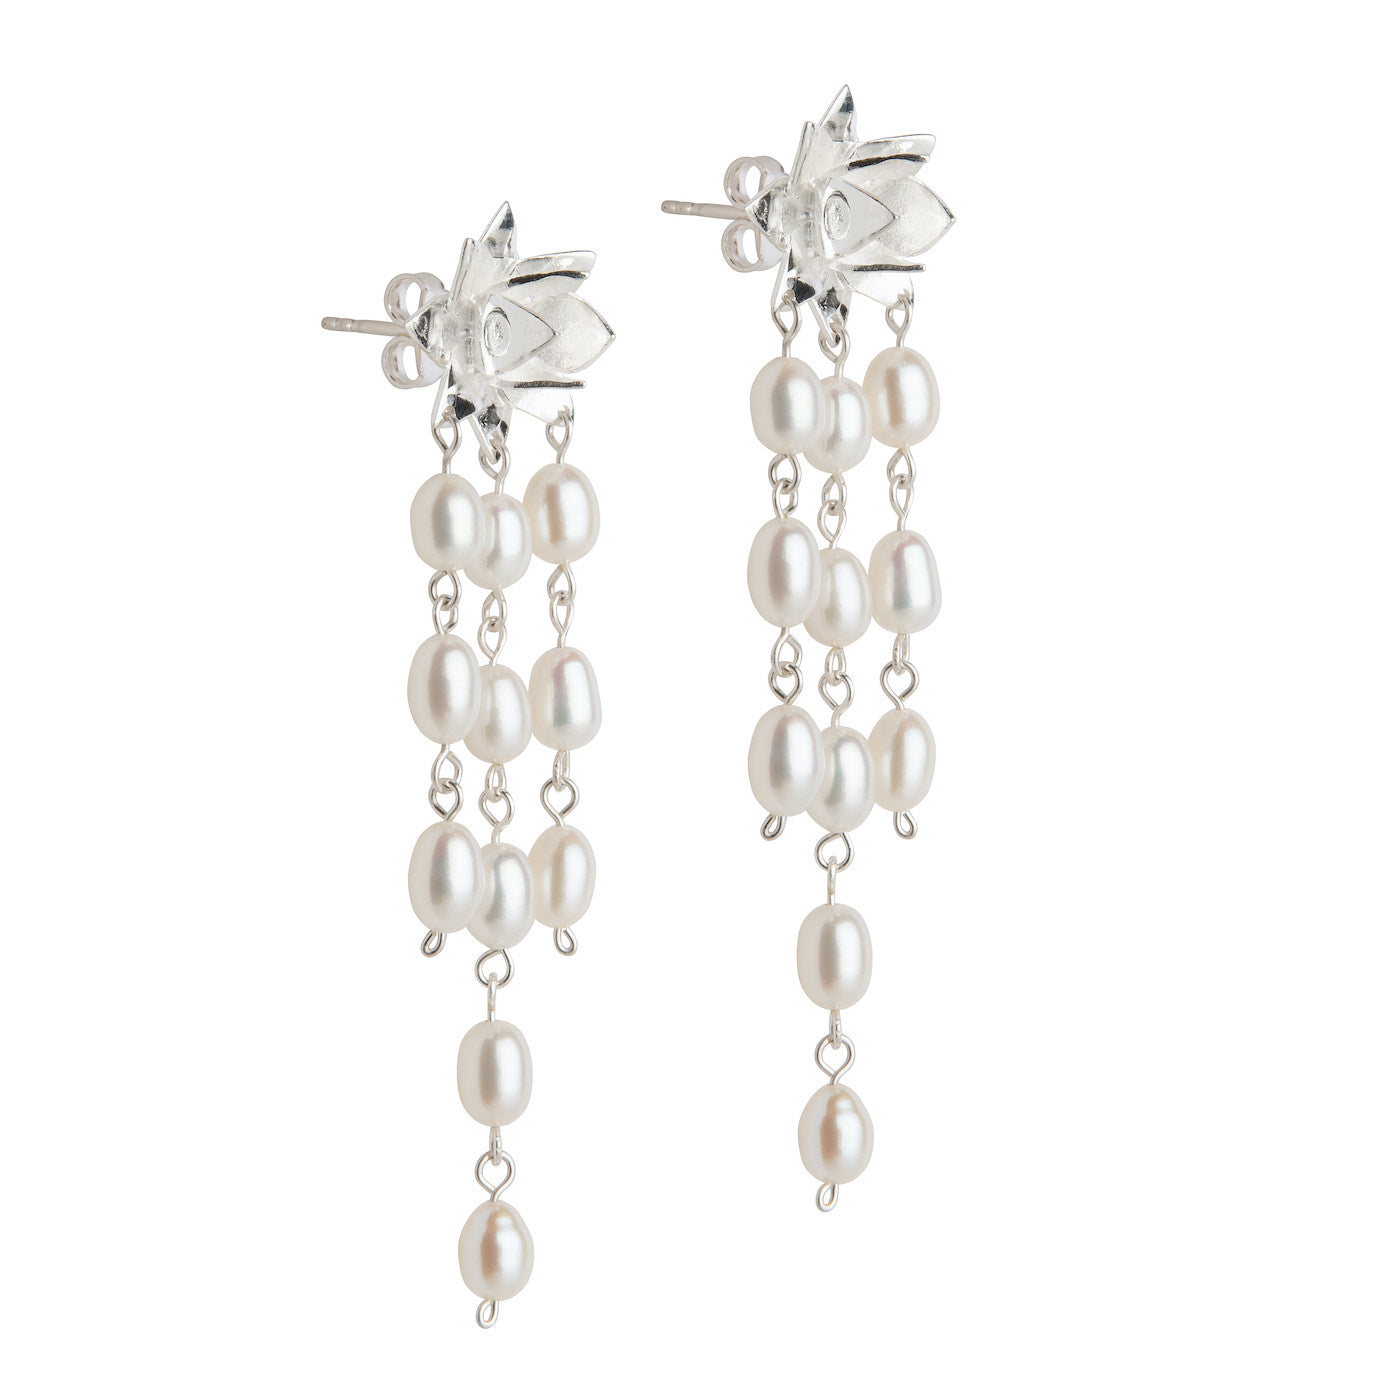 Front view of Lotus Cascade pearl earrings in sterling silver on white background